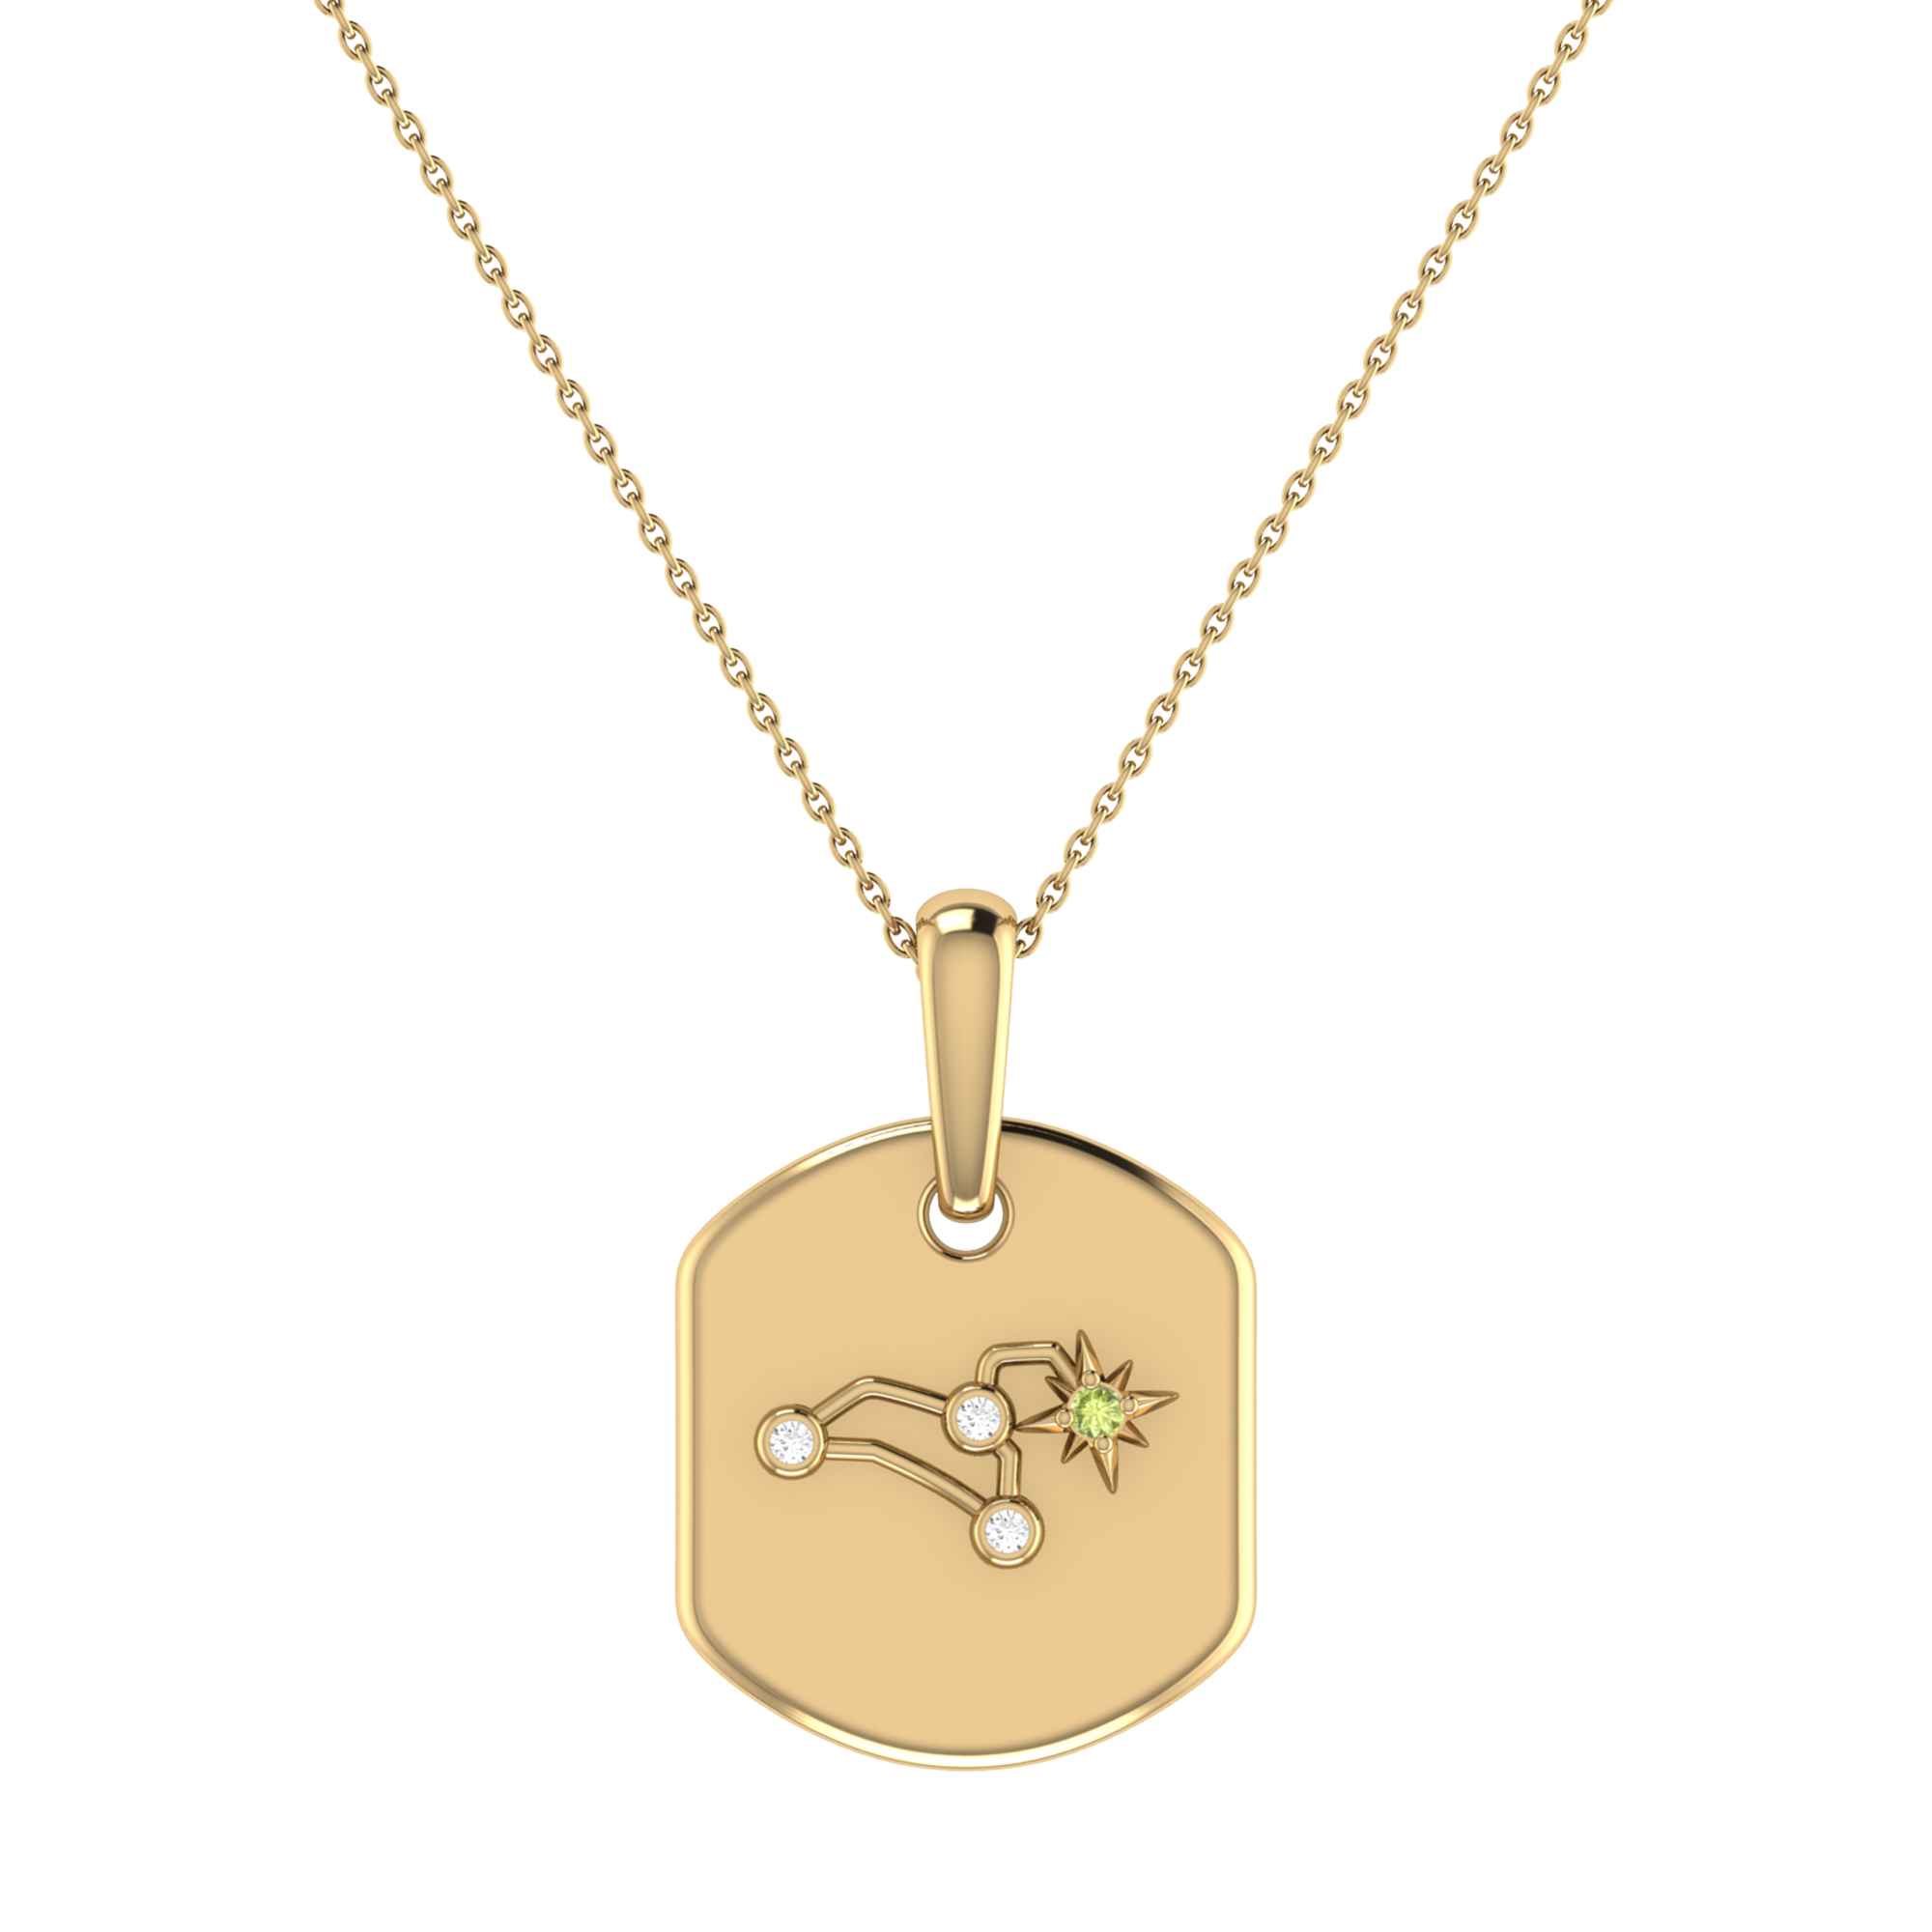 Diamond and Peridot Leo Constellation Zodiac Tag Necklace in 14k Yellow Gold  Plated Sterling Silver